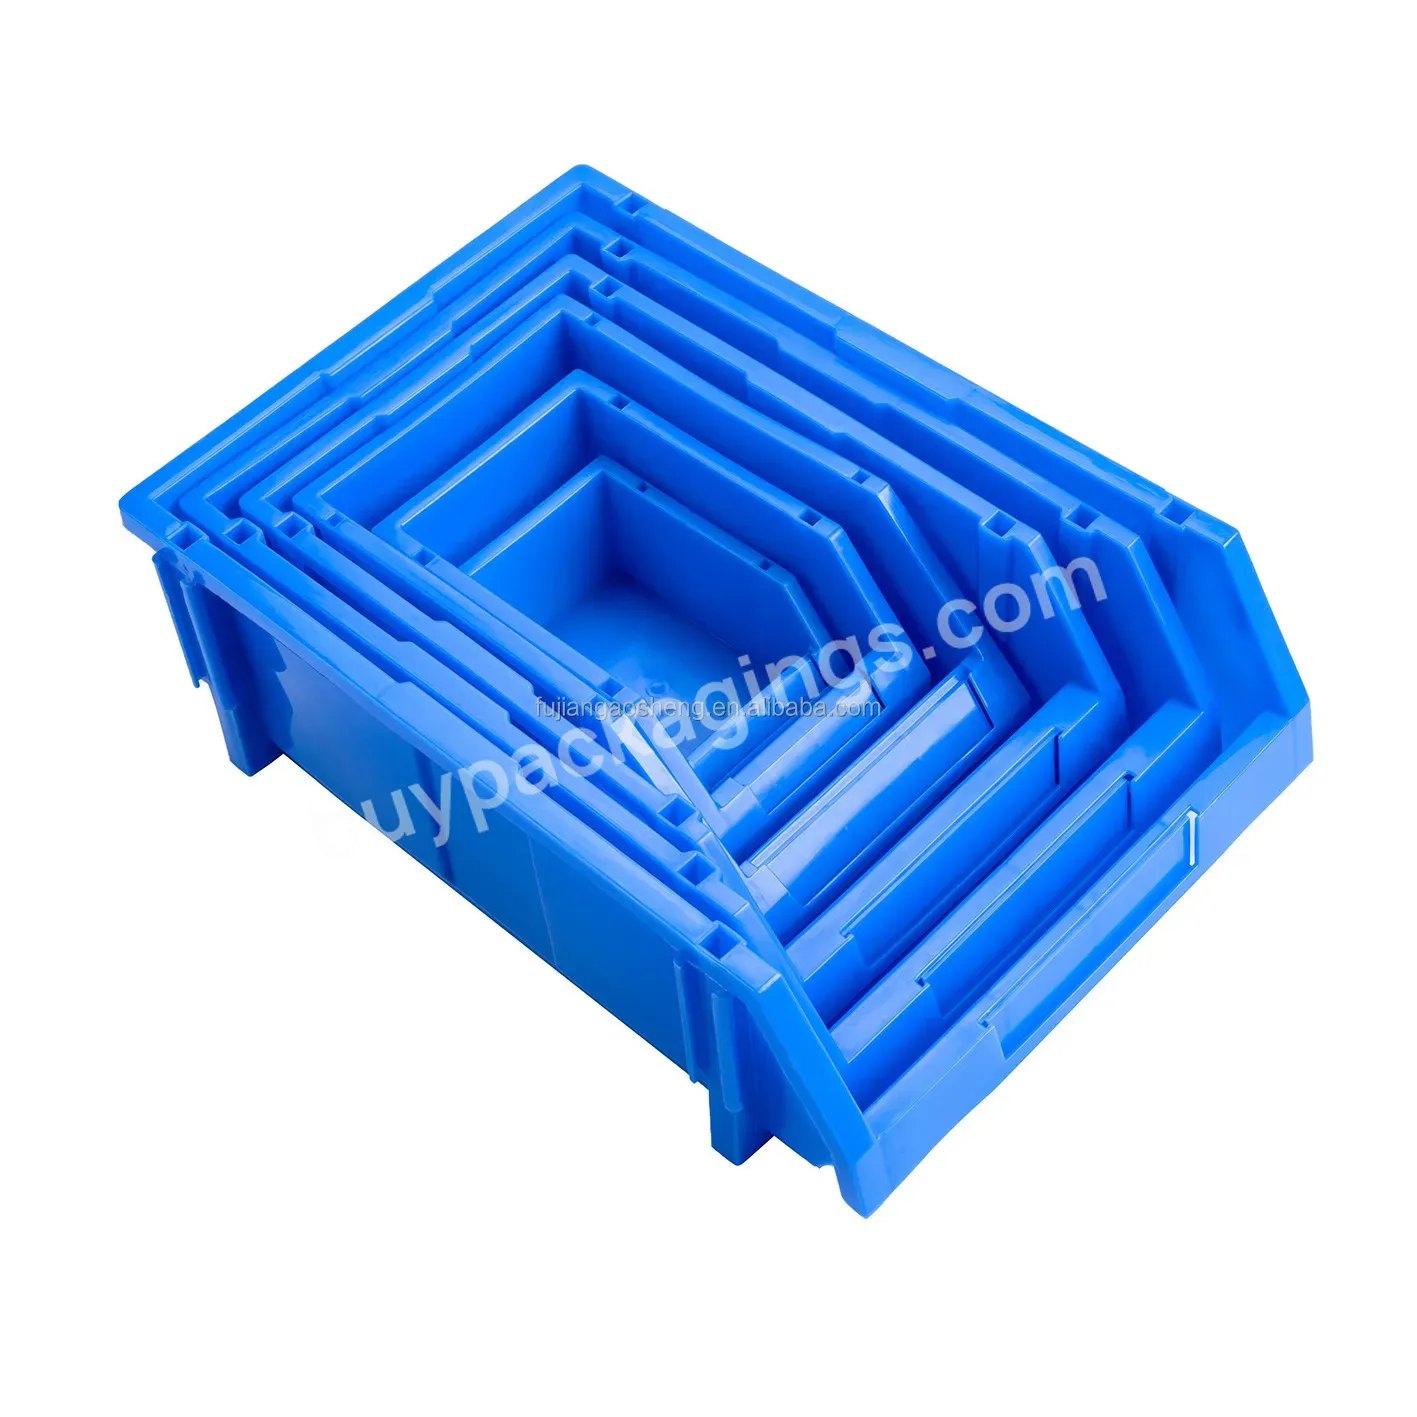 Battery Spare Part Box Cheap Price For Industrial Plastic Portable Boxes Plastic Stackable And Divisible Storage Shelf Bins - Buy Kids Plastic Storage Bins,Cheap Plastic Storage Bins,Stackable Bread Bin.